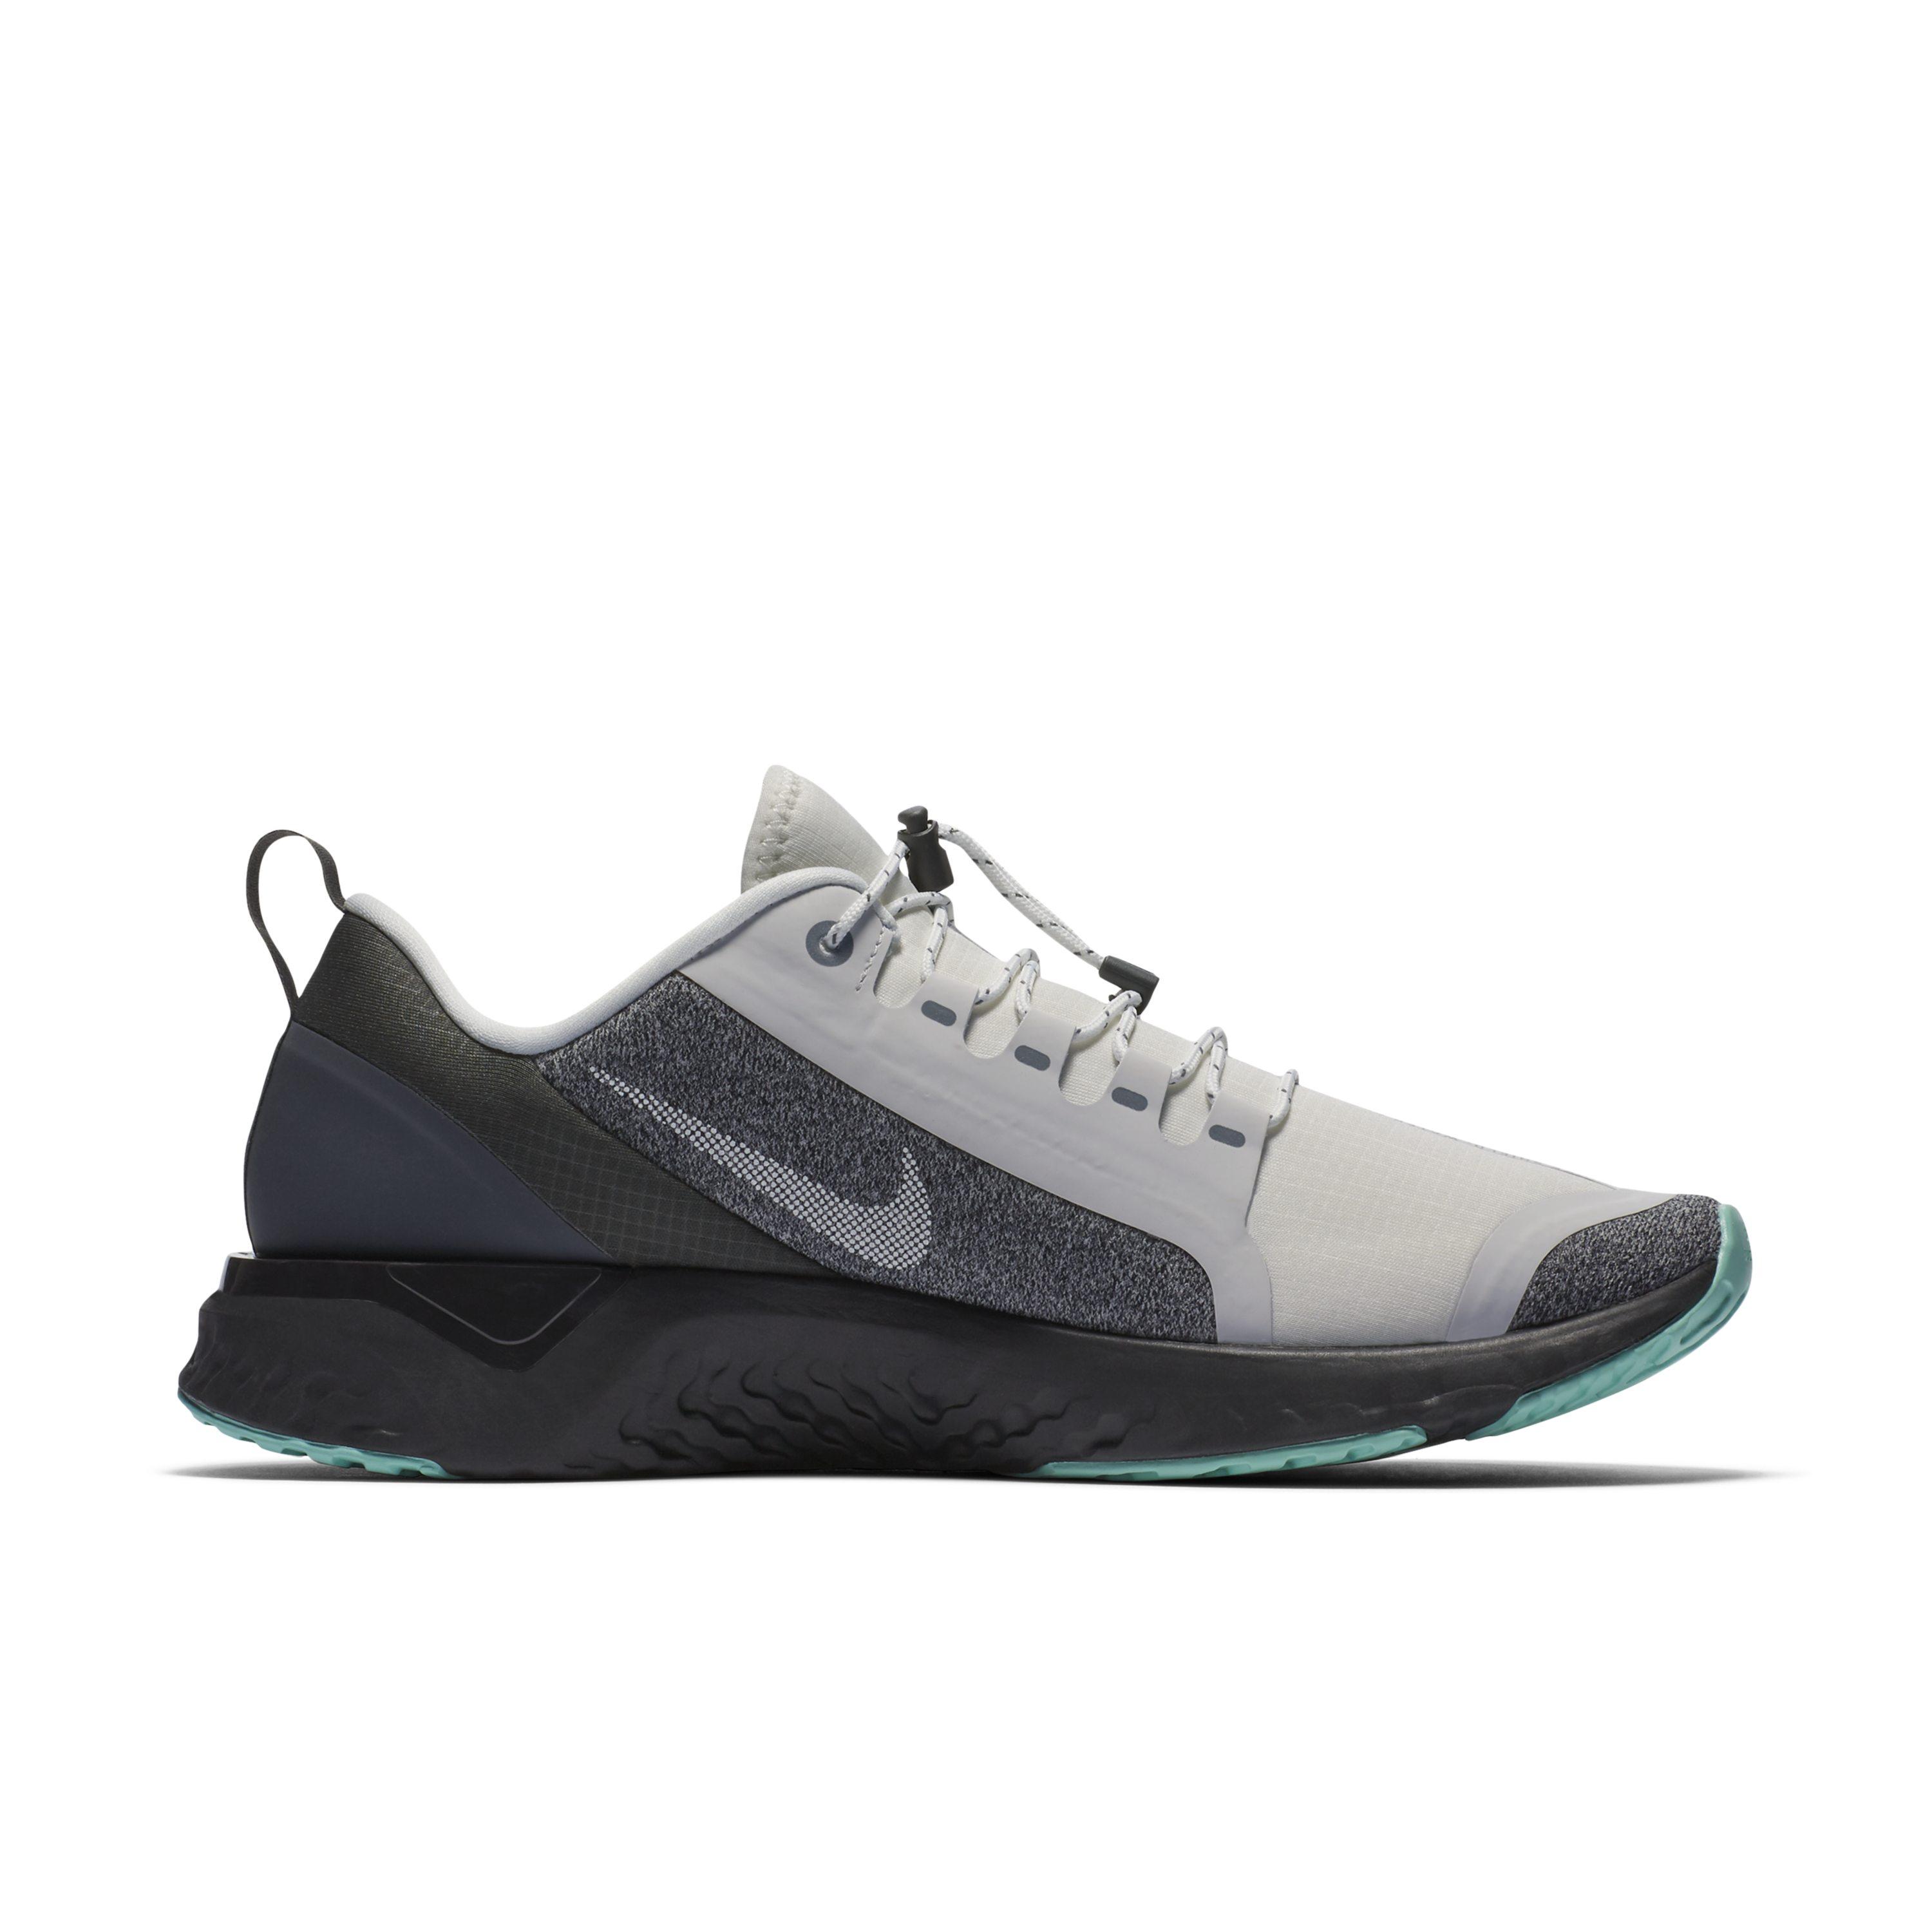 Nike Odyssey React Shield Water-repellent Running Shoe in White | Lyst UK